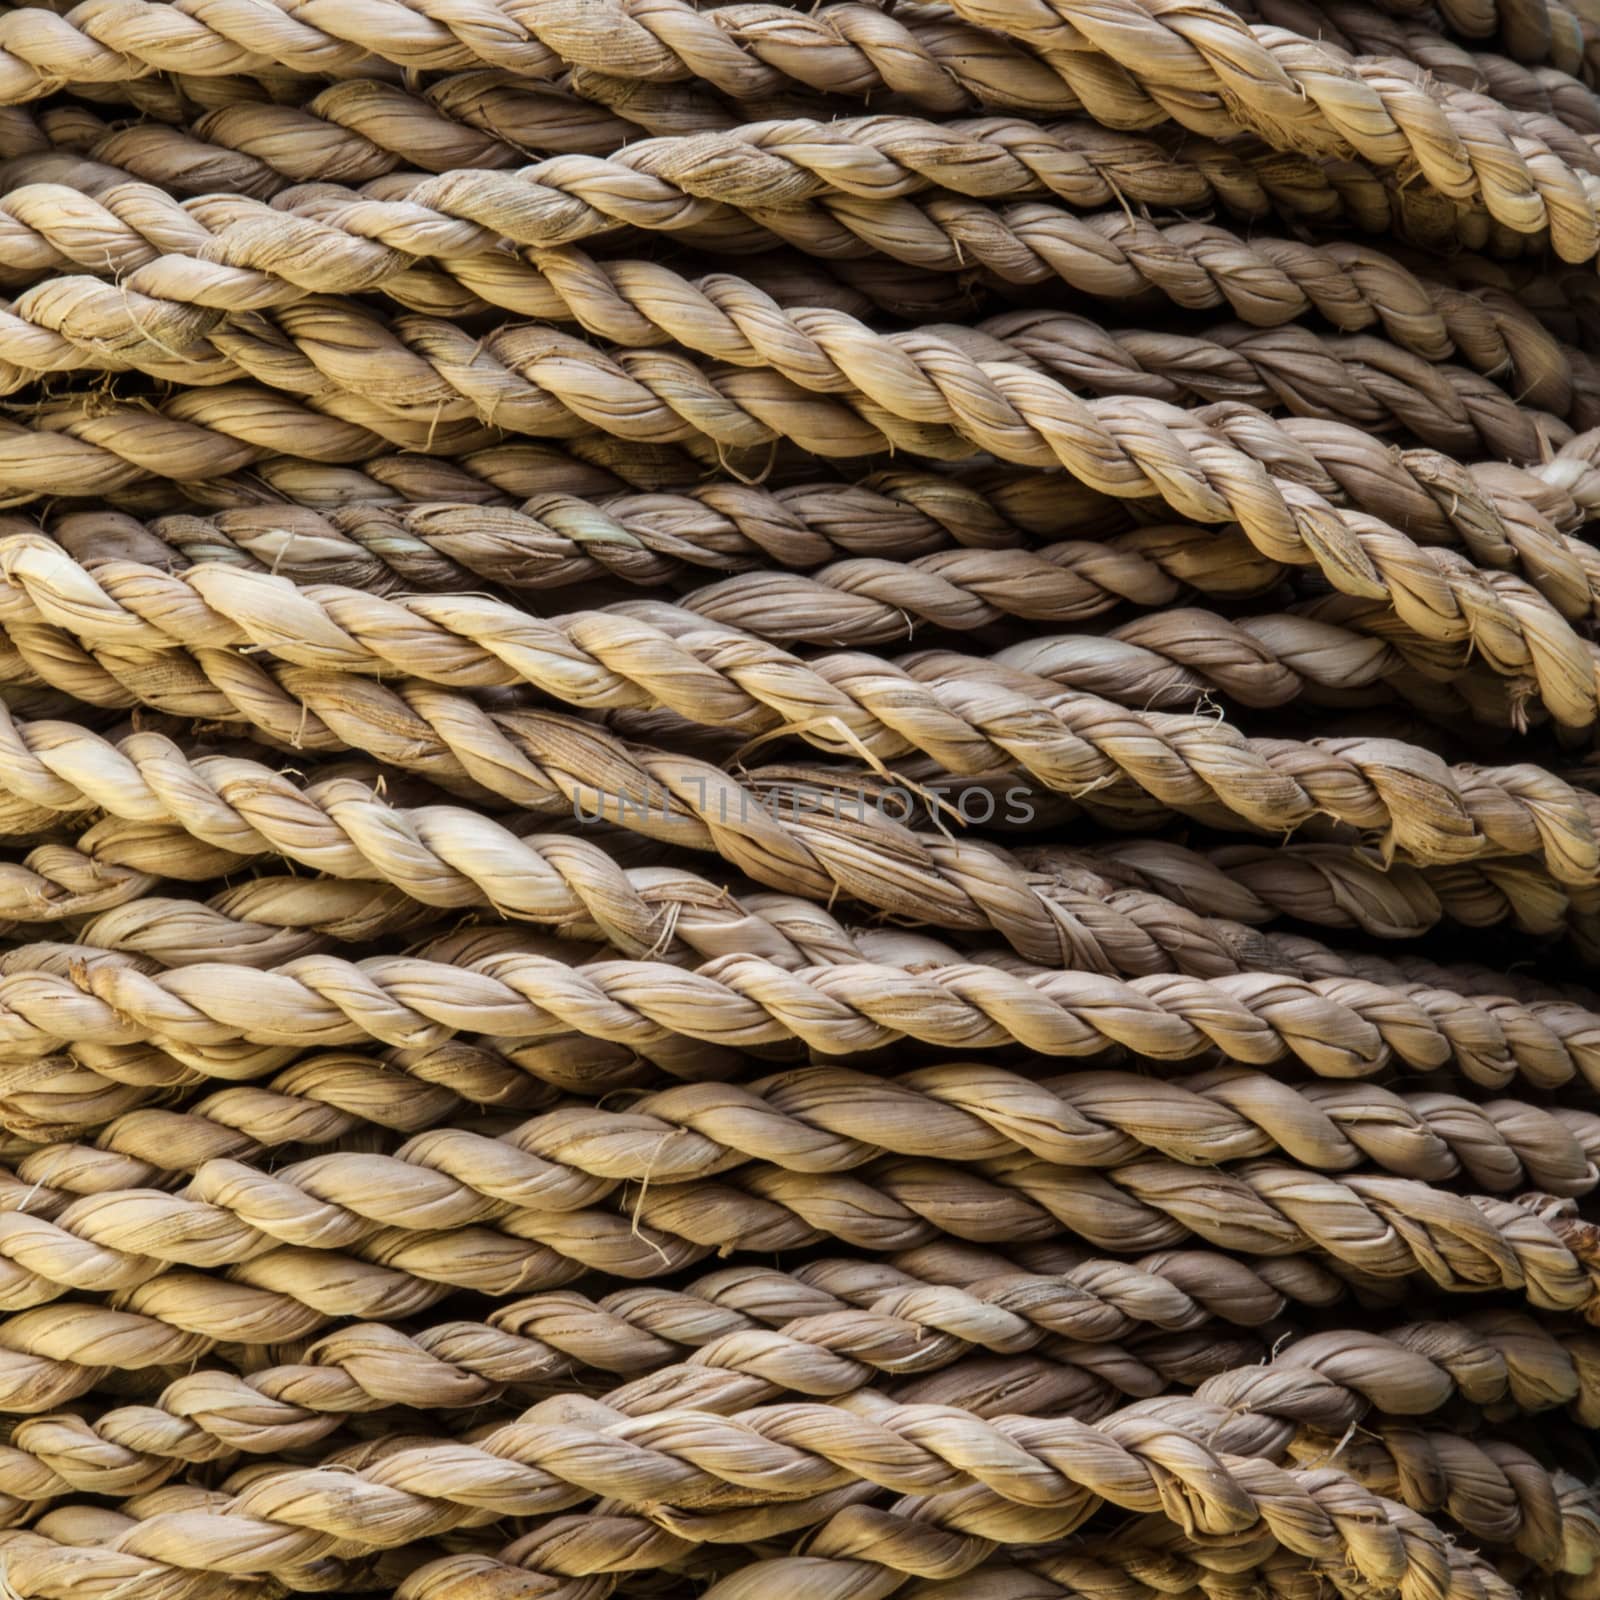 A coil of rough string